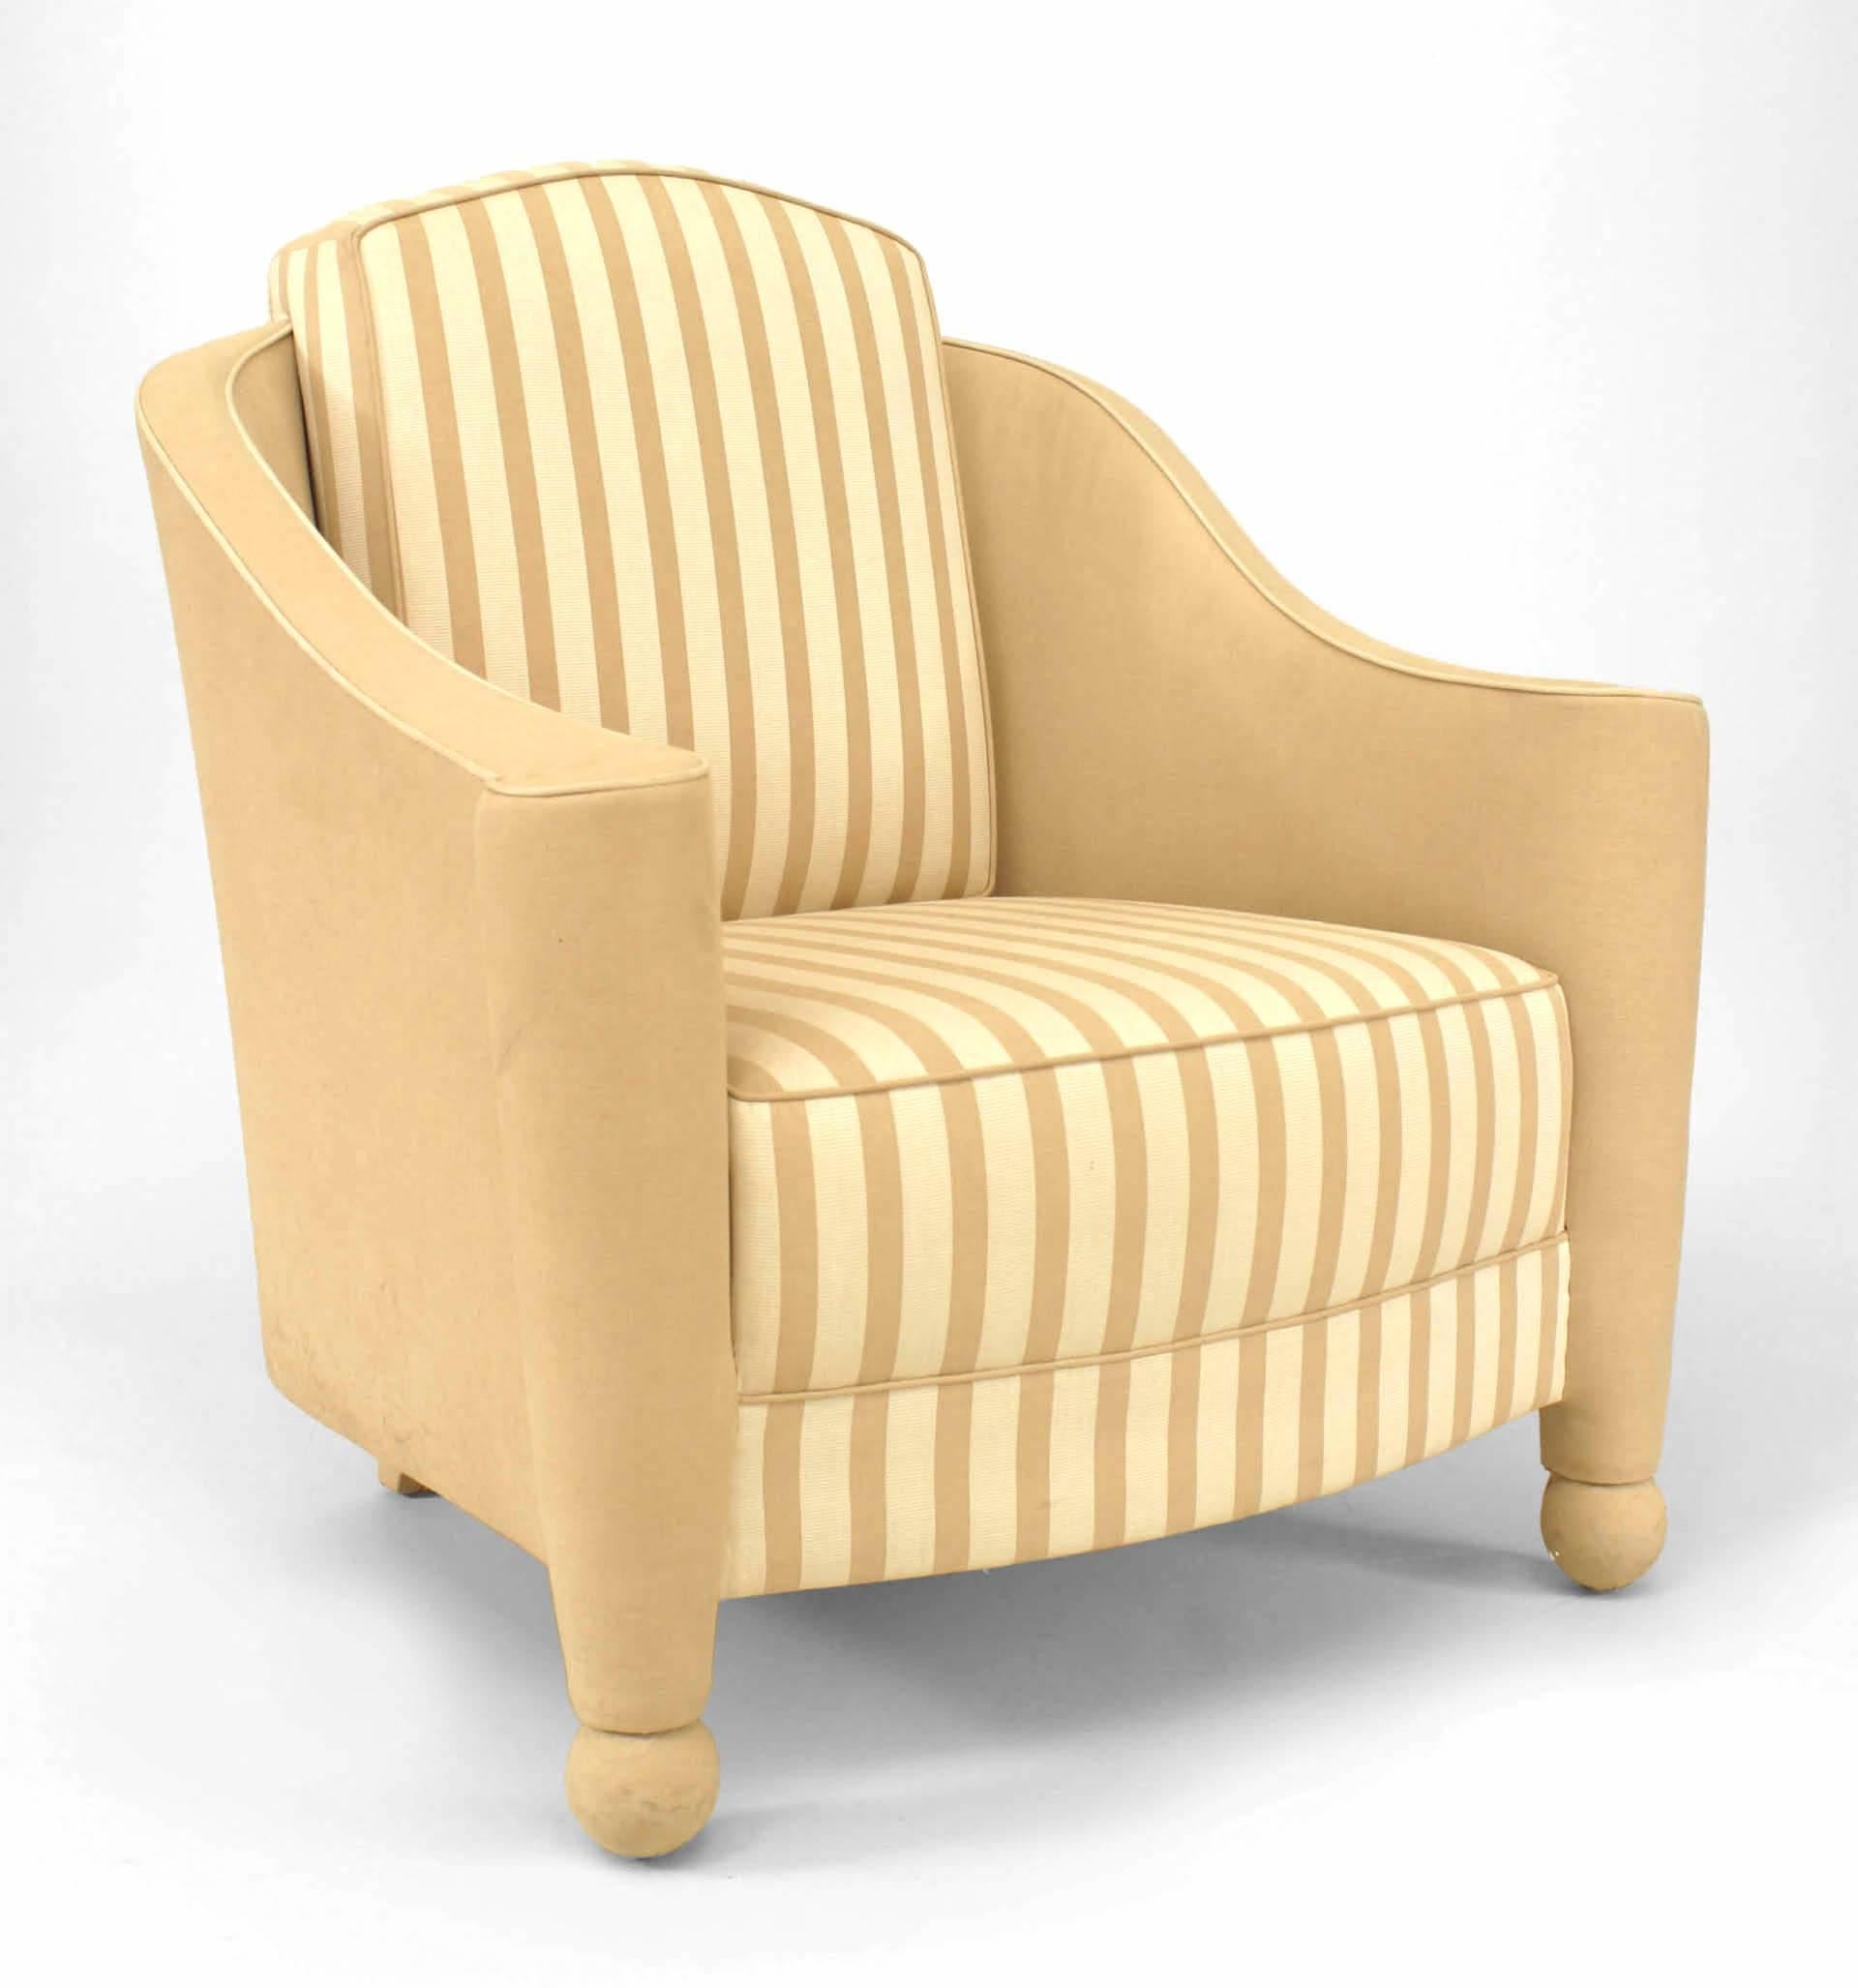 Pair of French Art Deco-style beige linen upholstered bergeres with round back and flared arms with striped seat and back cushion (GEOFFREY BRADFIELD DESIGN) (PRICED AS Pair)
